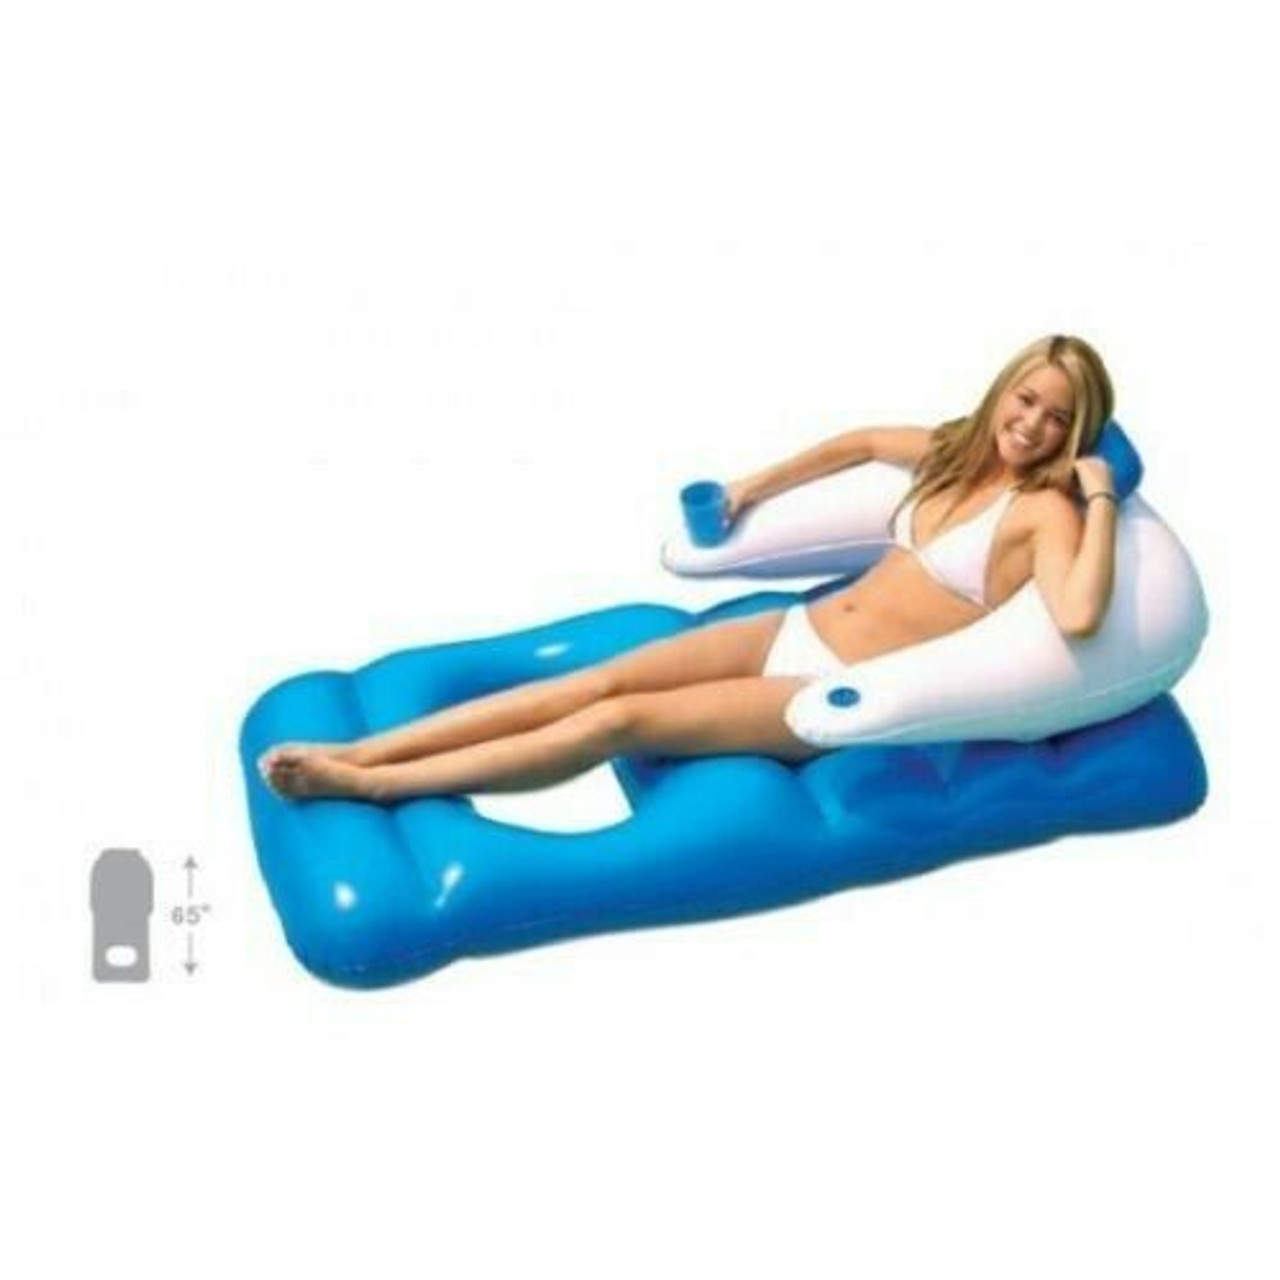 Poolmaster Classic Floating Pool Lounger 85600 Ez Pool And Spa Supply